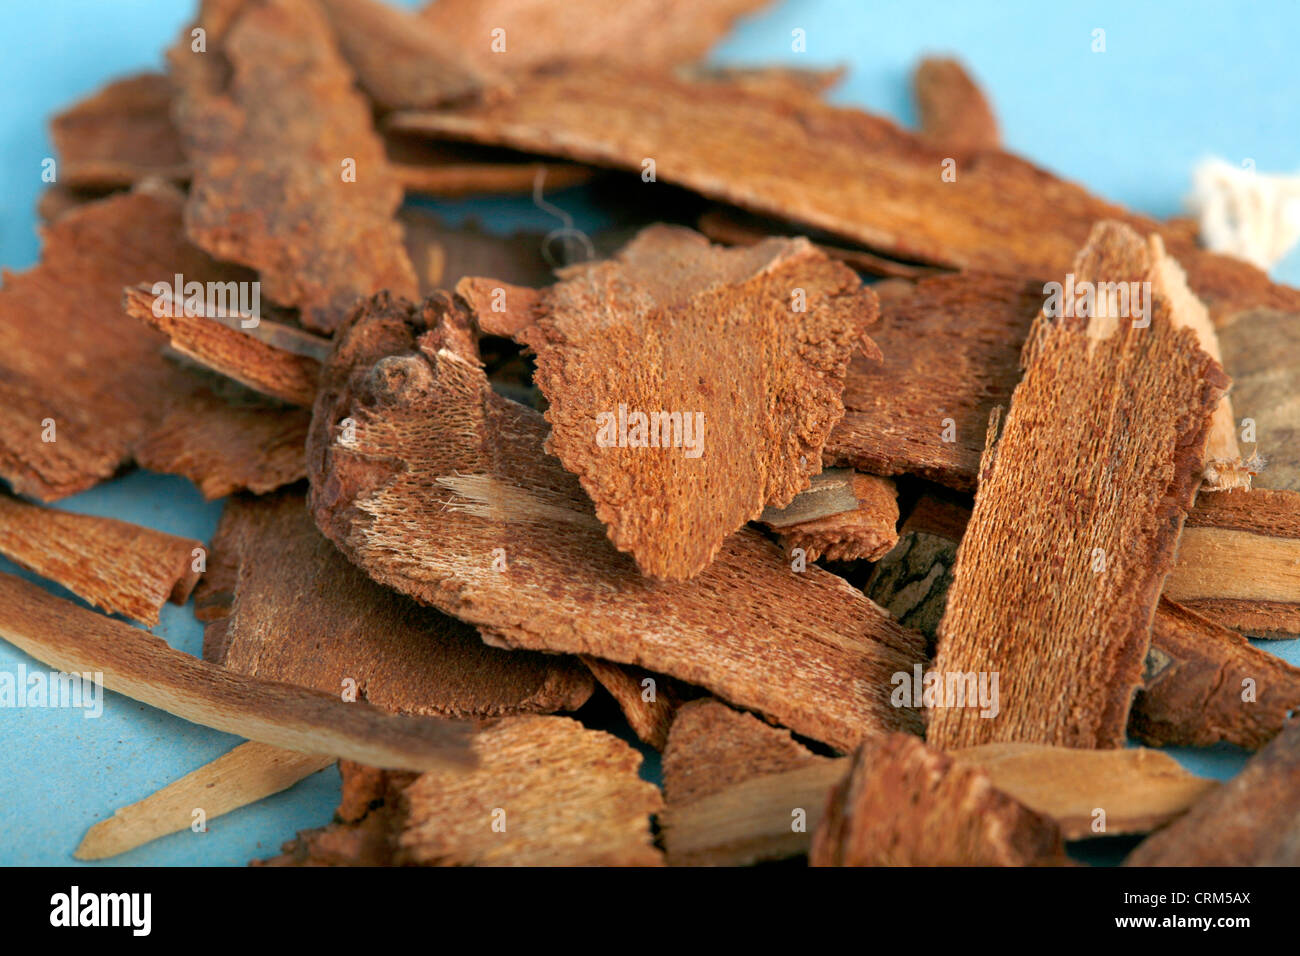 Cherry bark infused into a tea is used to treat sore throats, sores, burns, wounds. Stock Photo